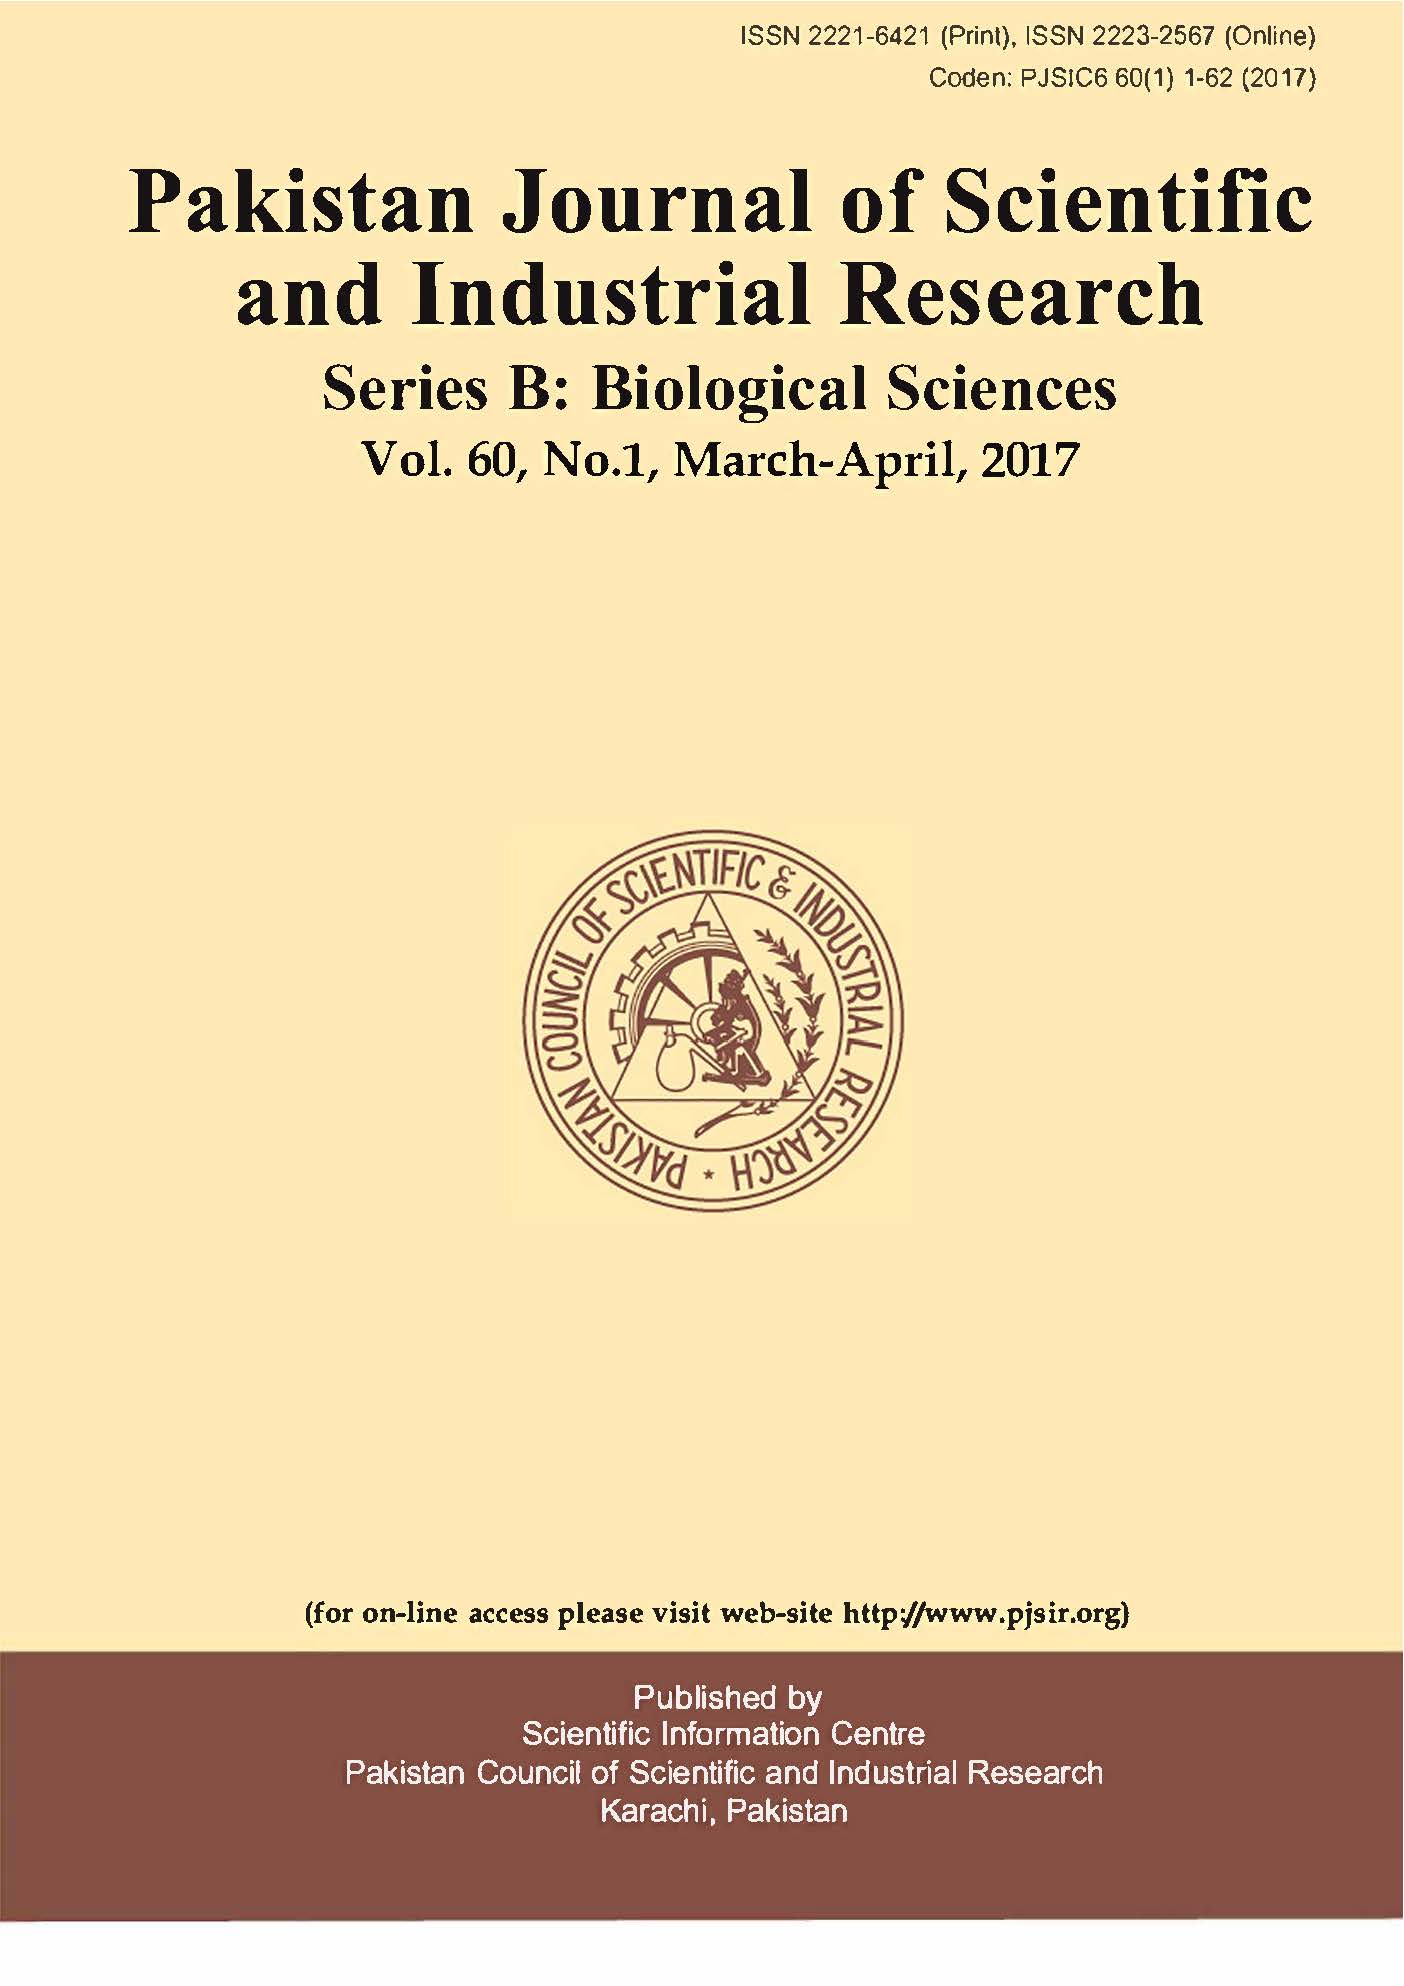 					View Vol. 60 No. 1 (2017): Pakistan Journal of Scientific and Industrial Research  Series B: Biological Sciences
				